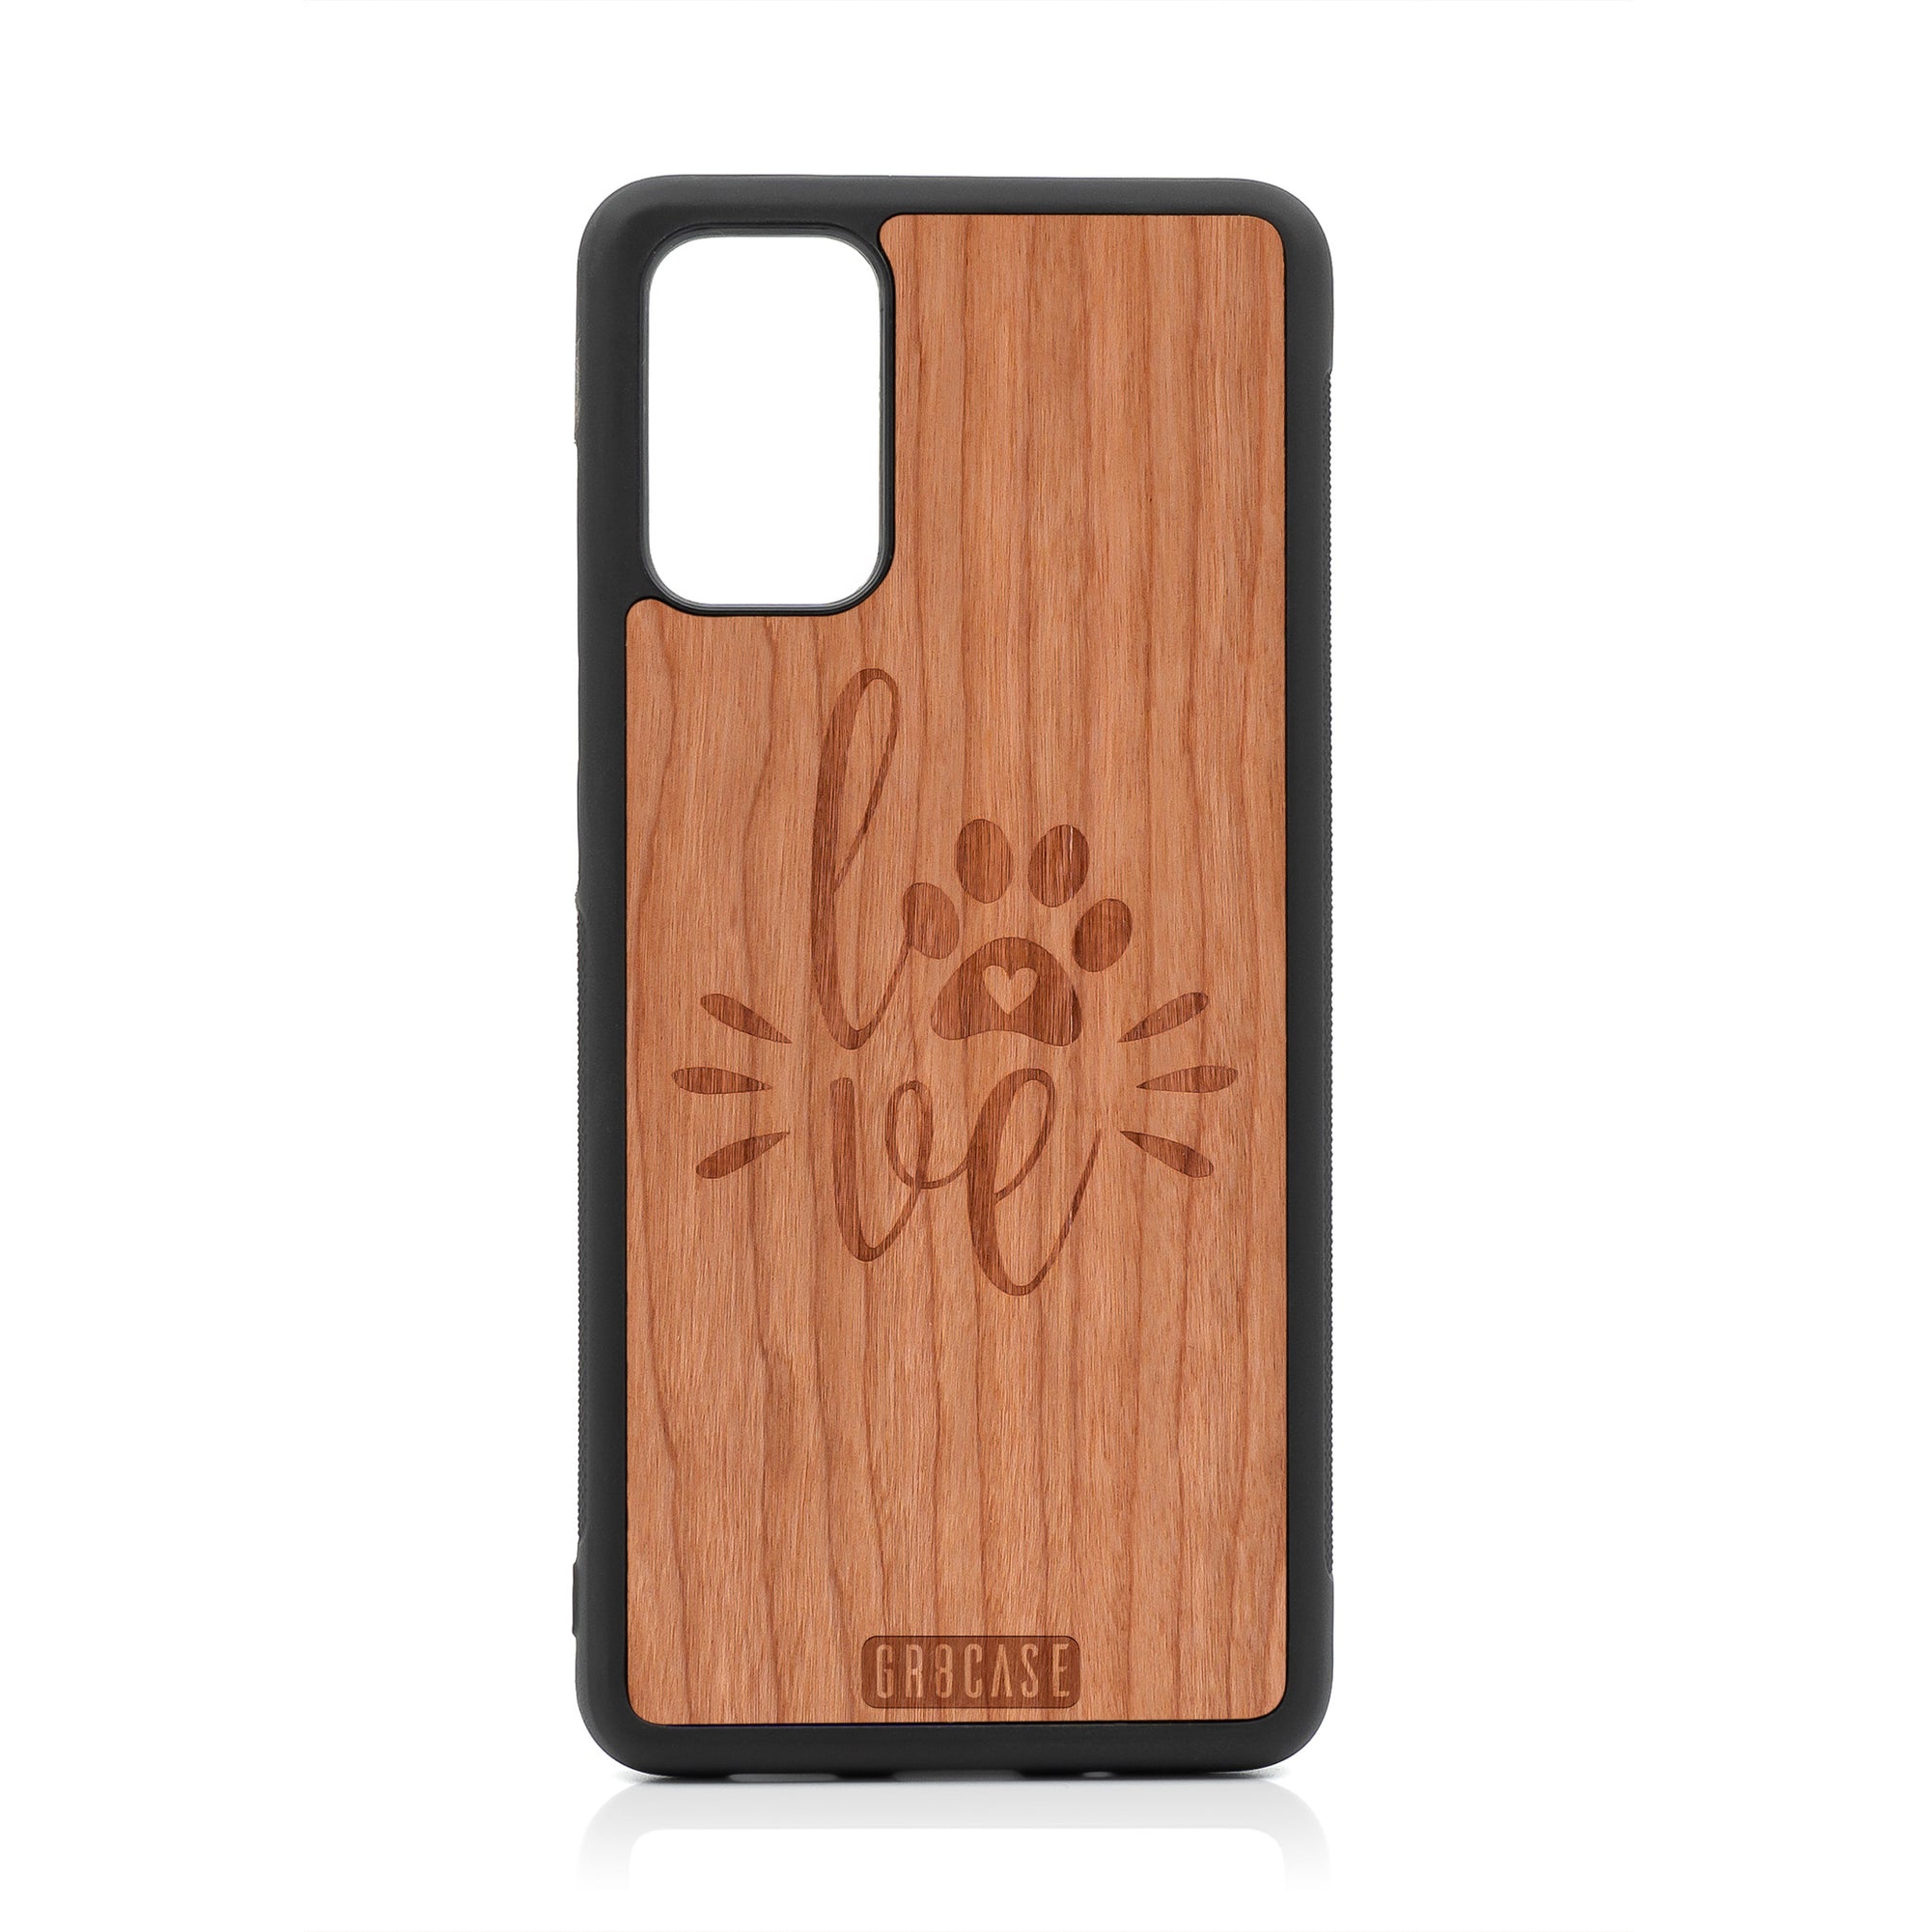 Paw Love Design Wood Case For Samsung Galaxy S20 Plus by GR8CASE